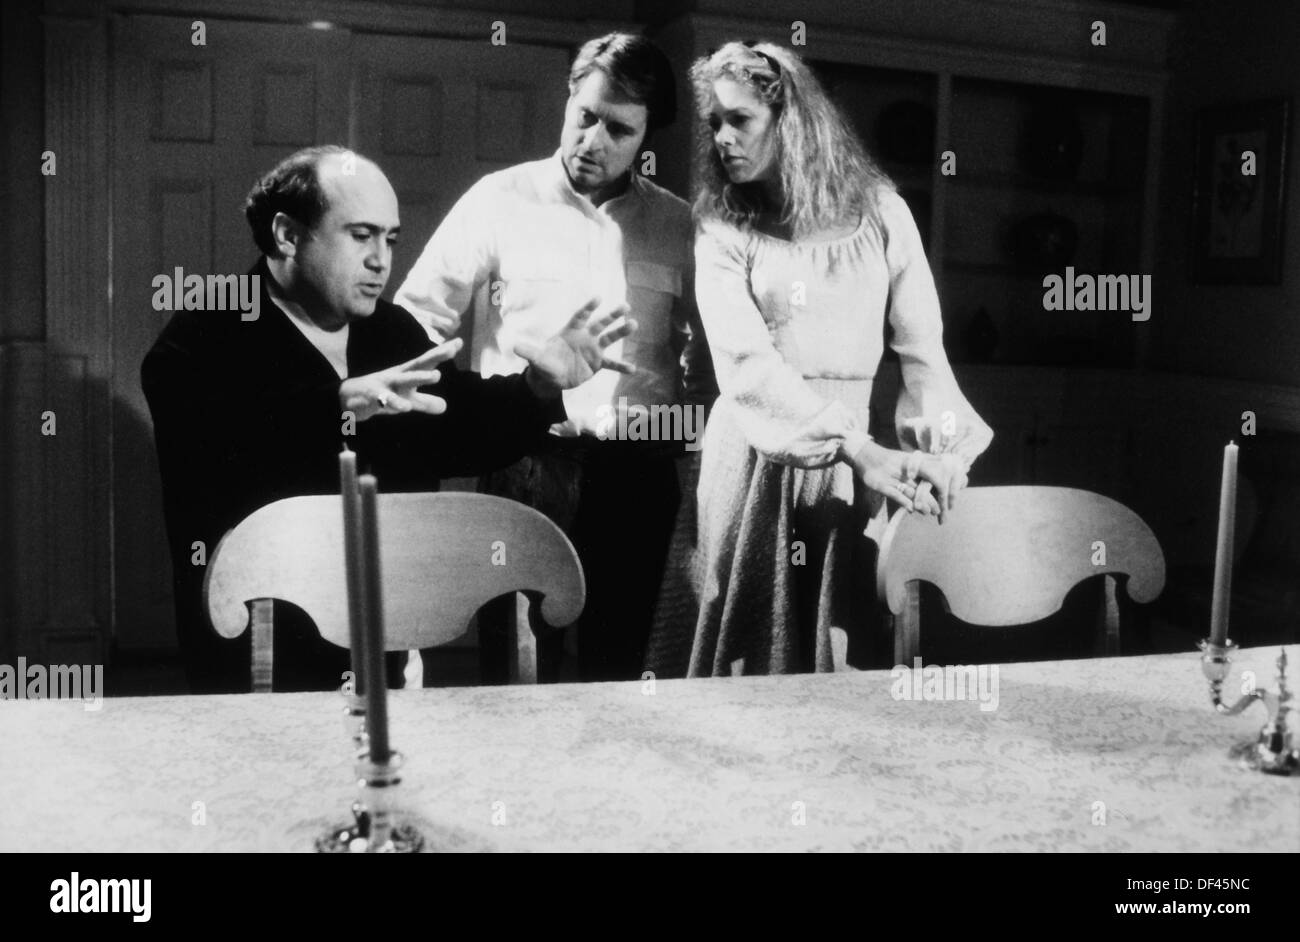 Danny Devito Directing Michael Douglas and Kathleen Turner on-set of the Film, "The War of the Roses", Photo by Francois Duhamel, Gracie Films with Distribution via 20th Century Fox, 1989 Stock Photo